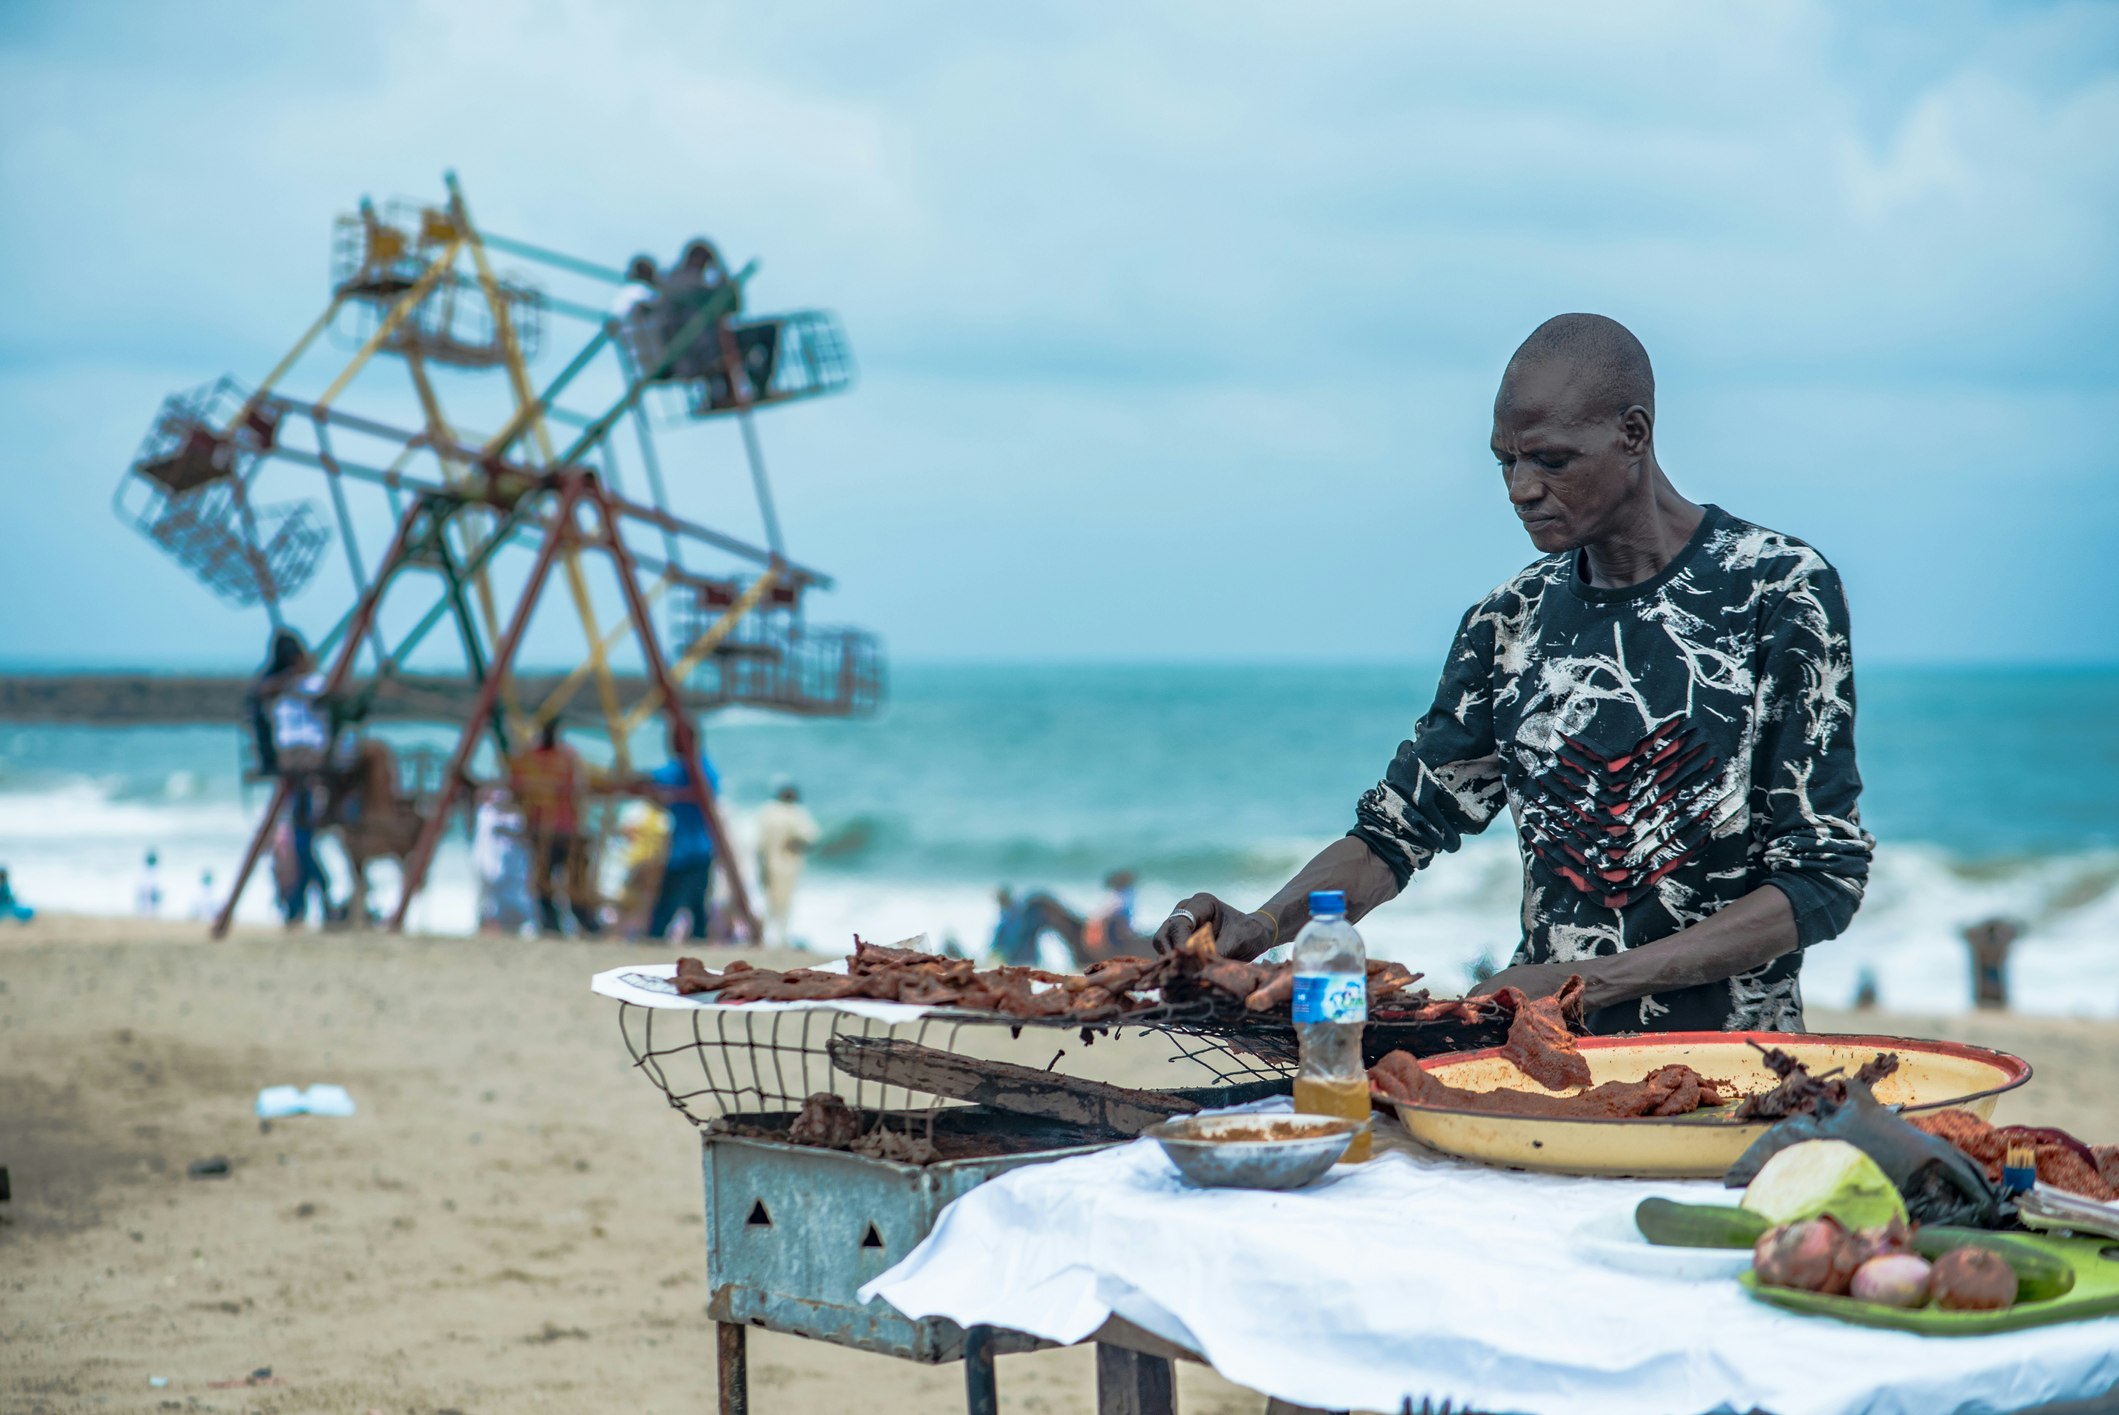 A man preparing roasted suya at a street food stall by the beach